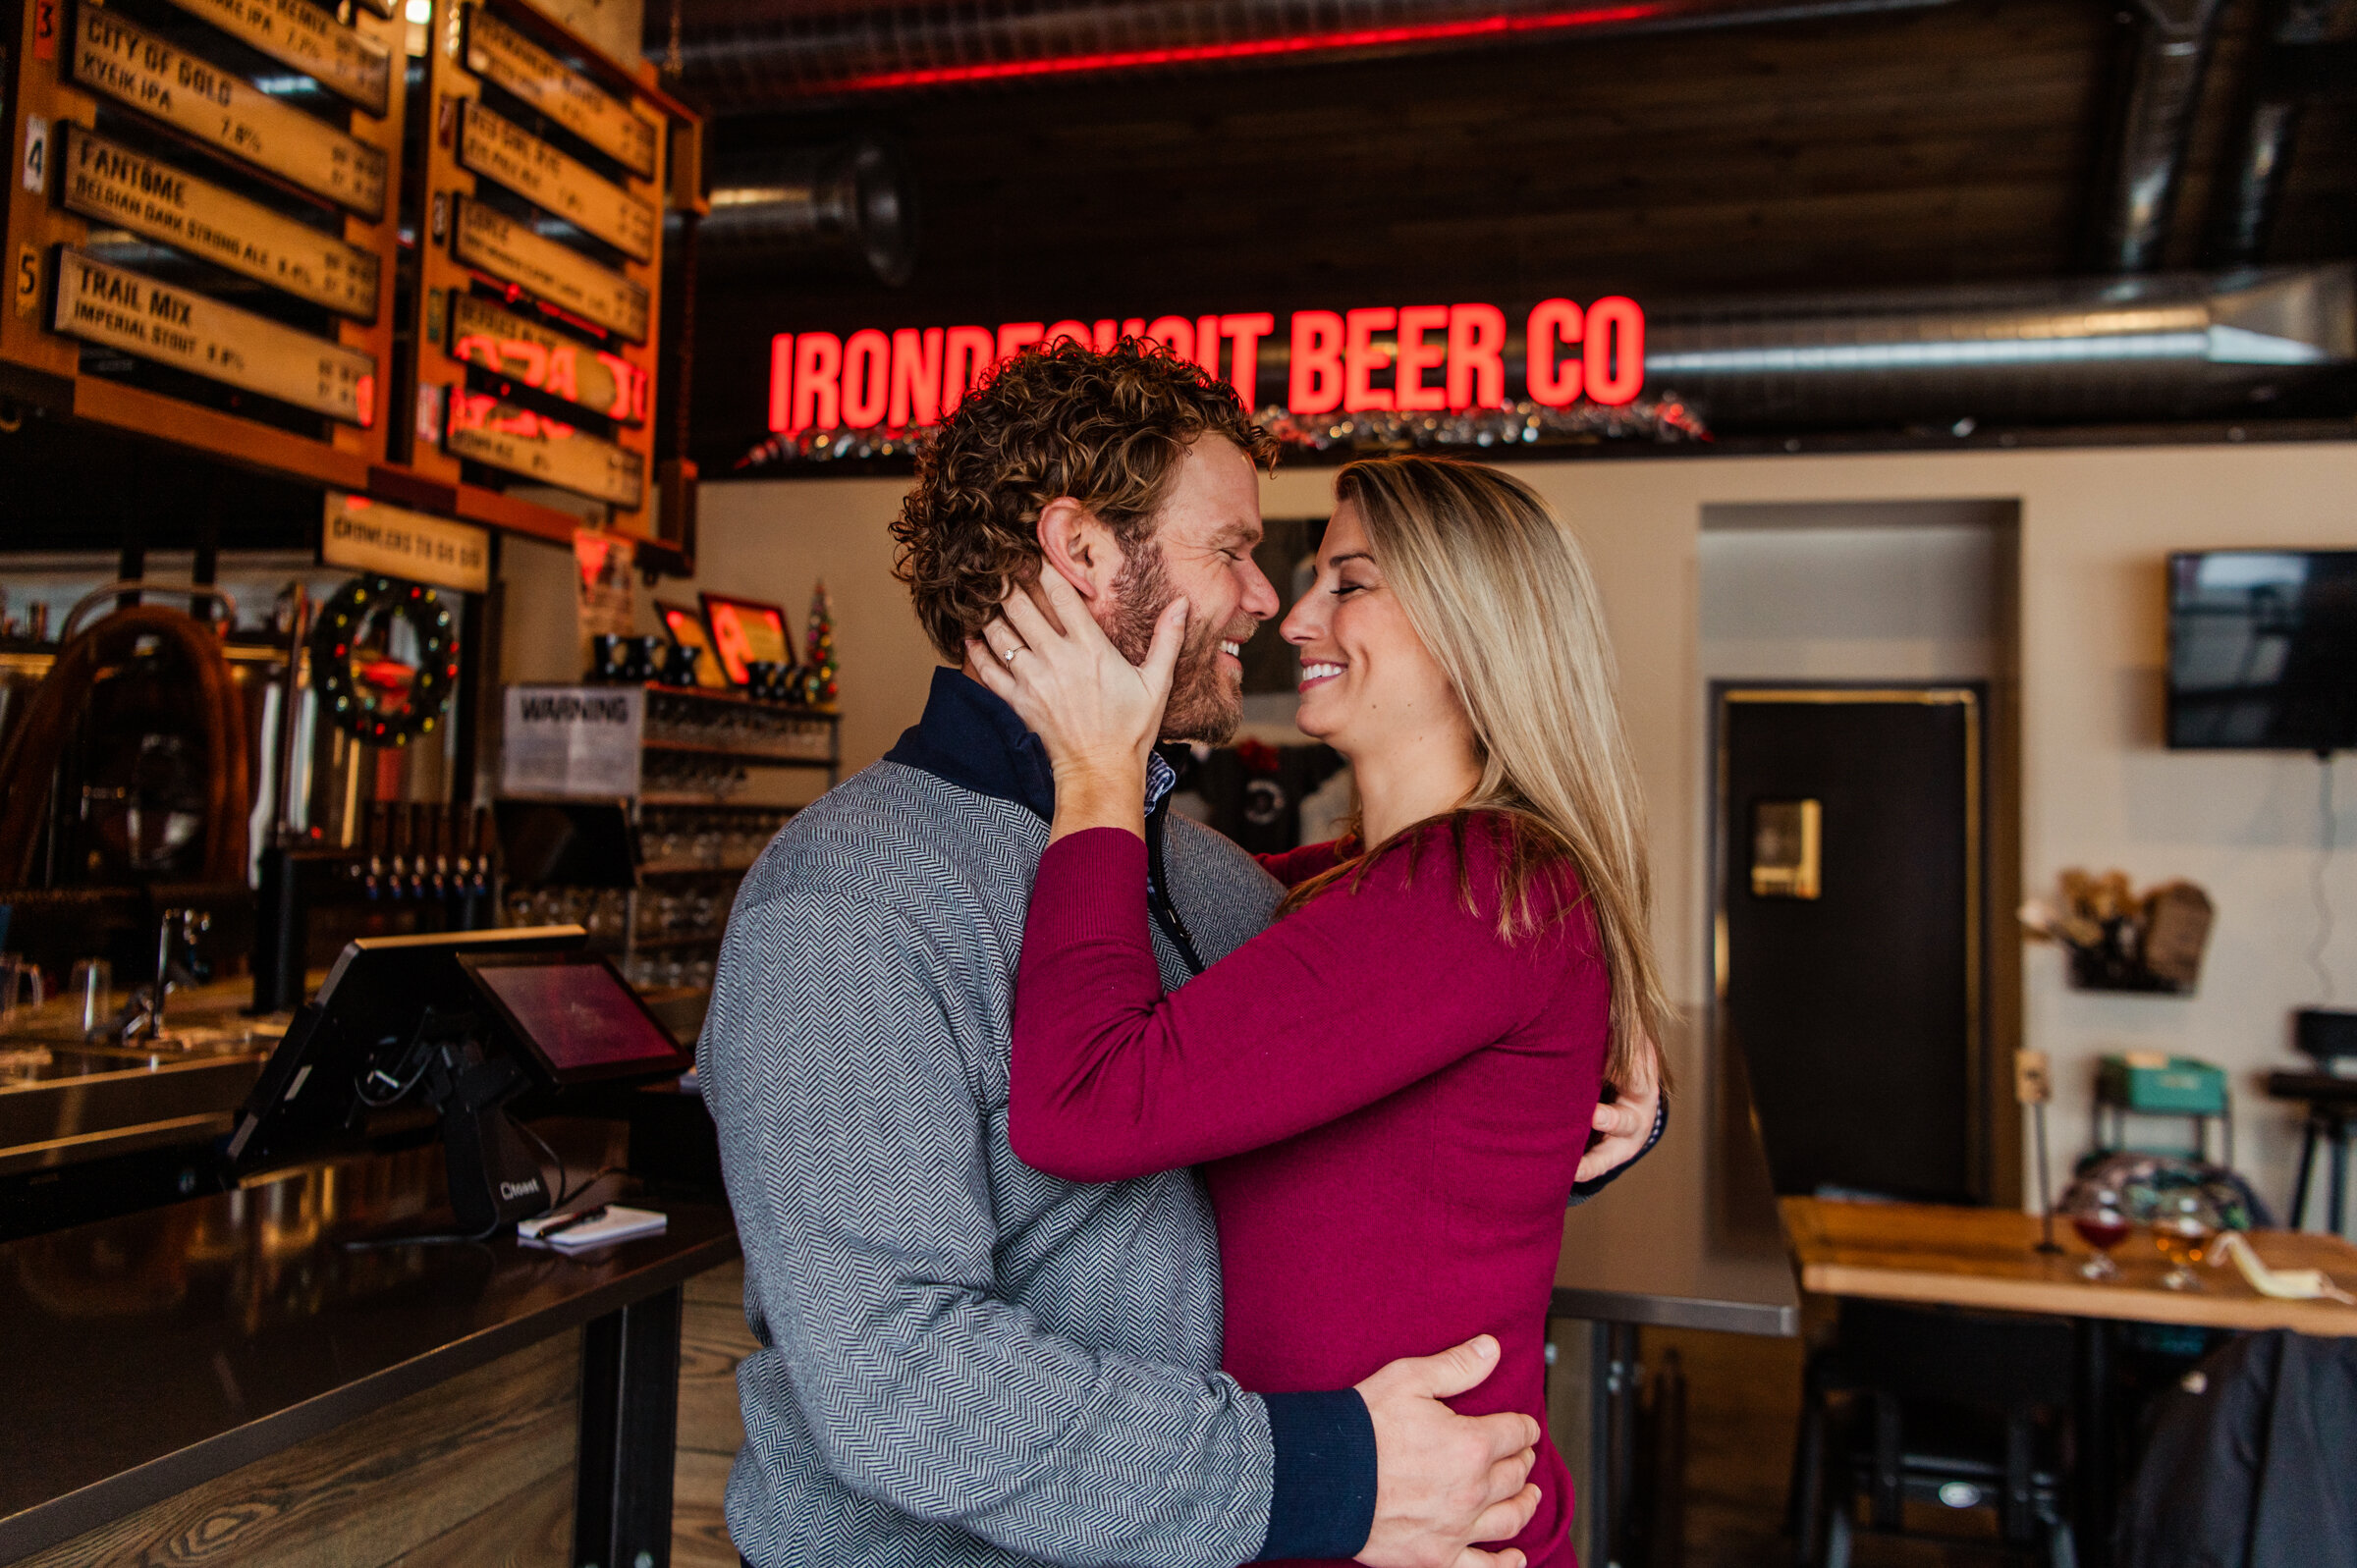 Irondequoit_Beer_Company_Durand_Eastman_Park_Rochester_Engagement_Session_JILL_STUDIO_Rochester_NY_Photographer_7051.jpg